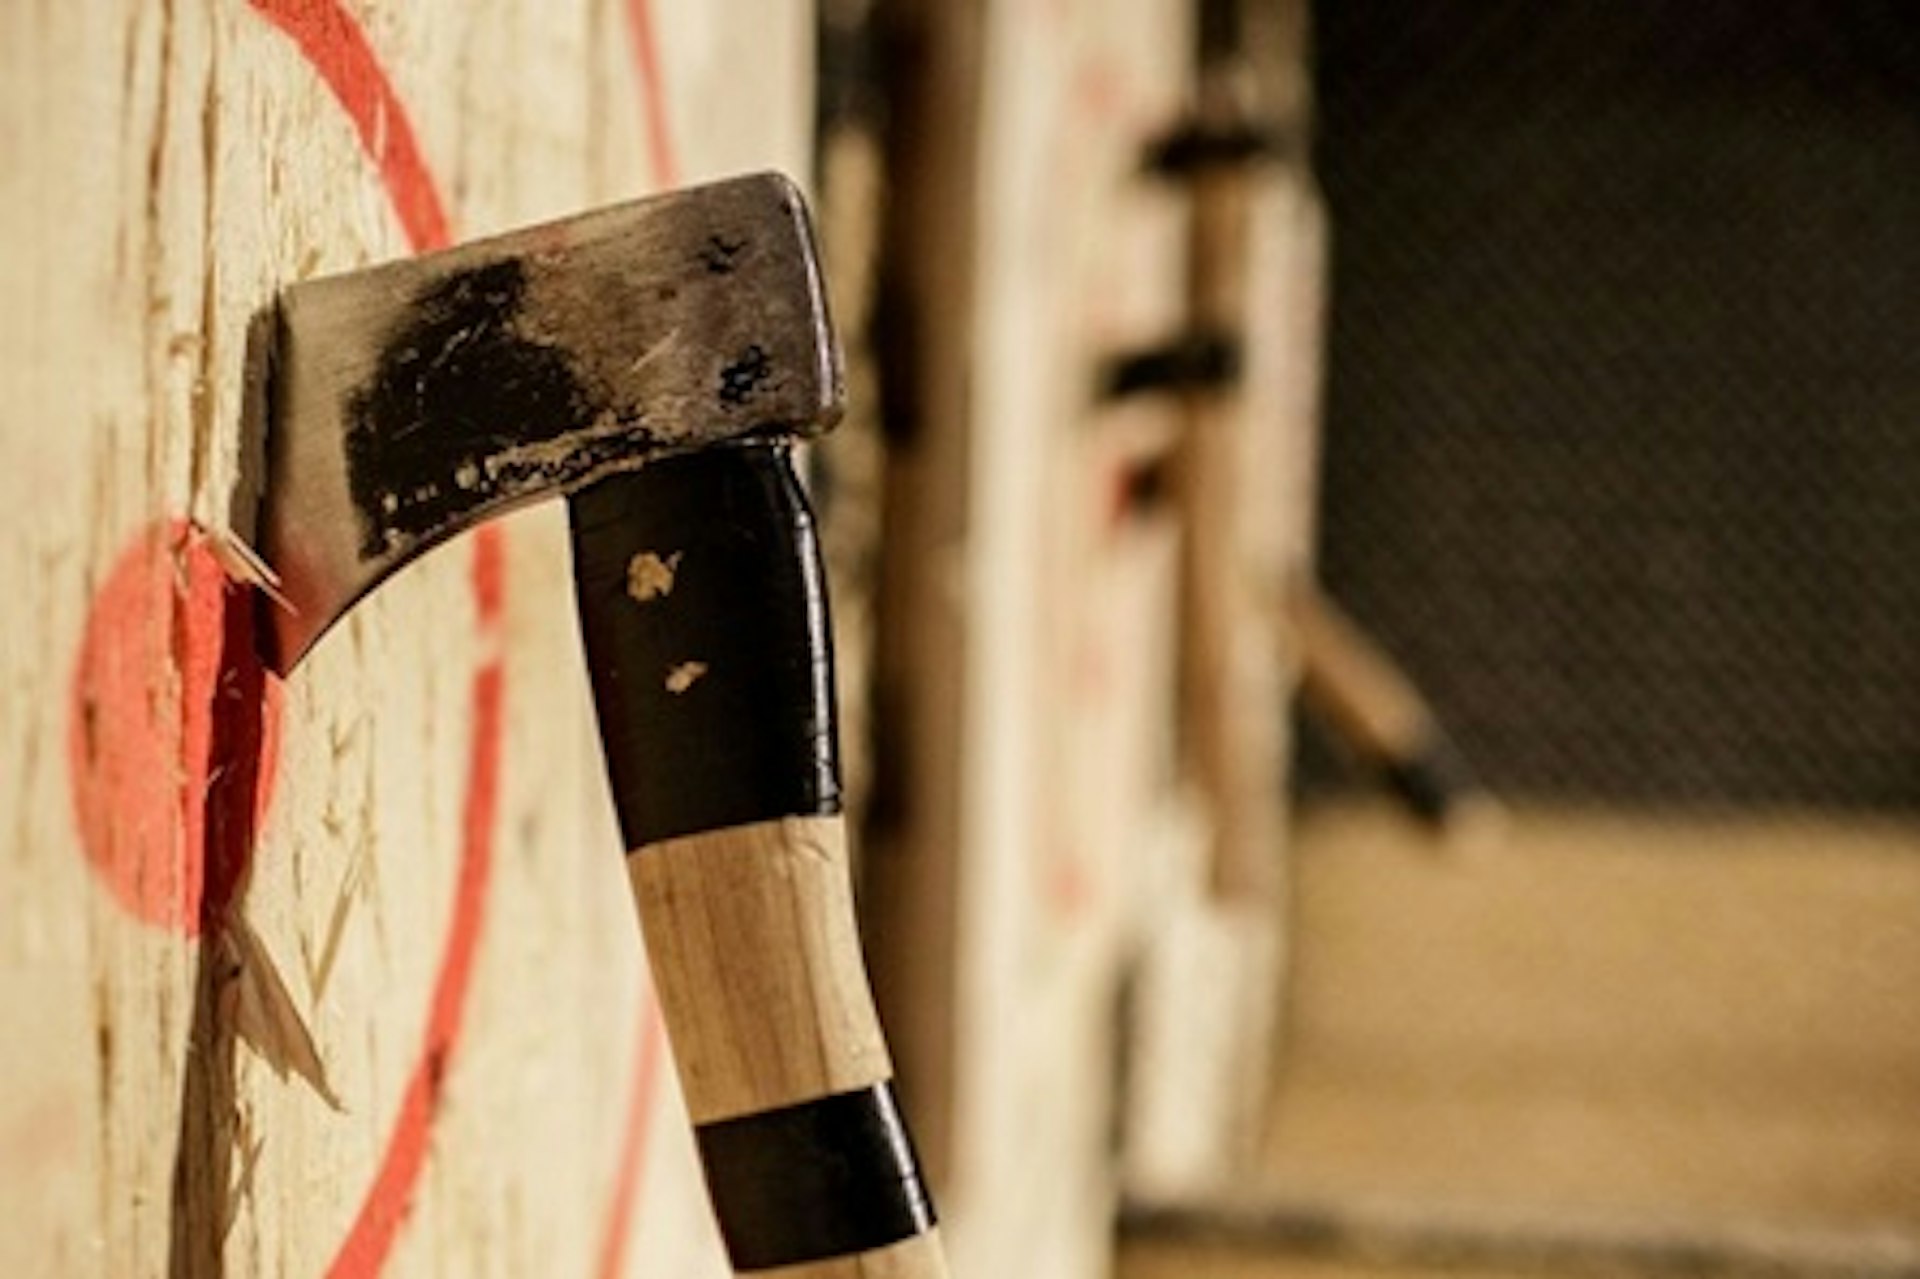 Urban Axe Throwing for Two at Whistle Punks, Leeds, Manchester or Bristol 4